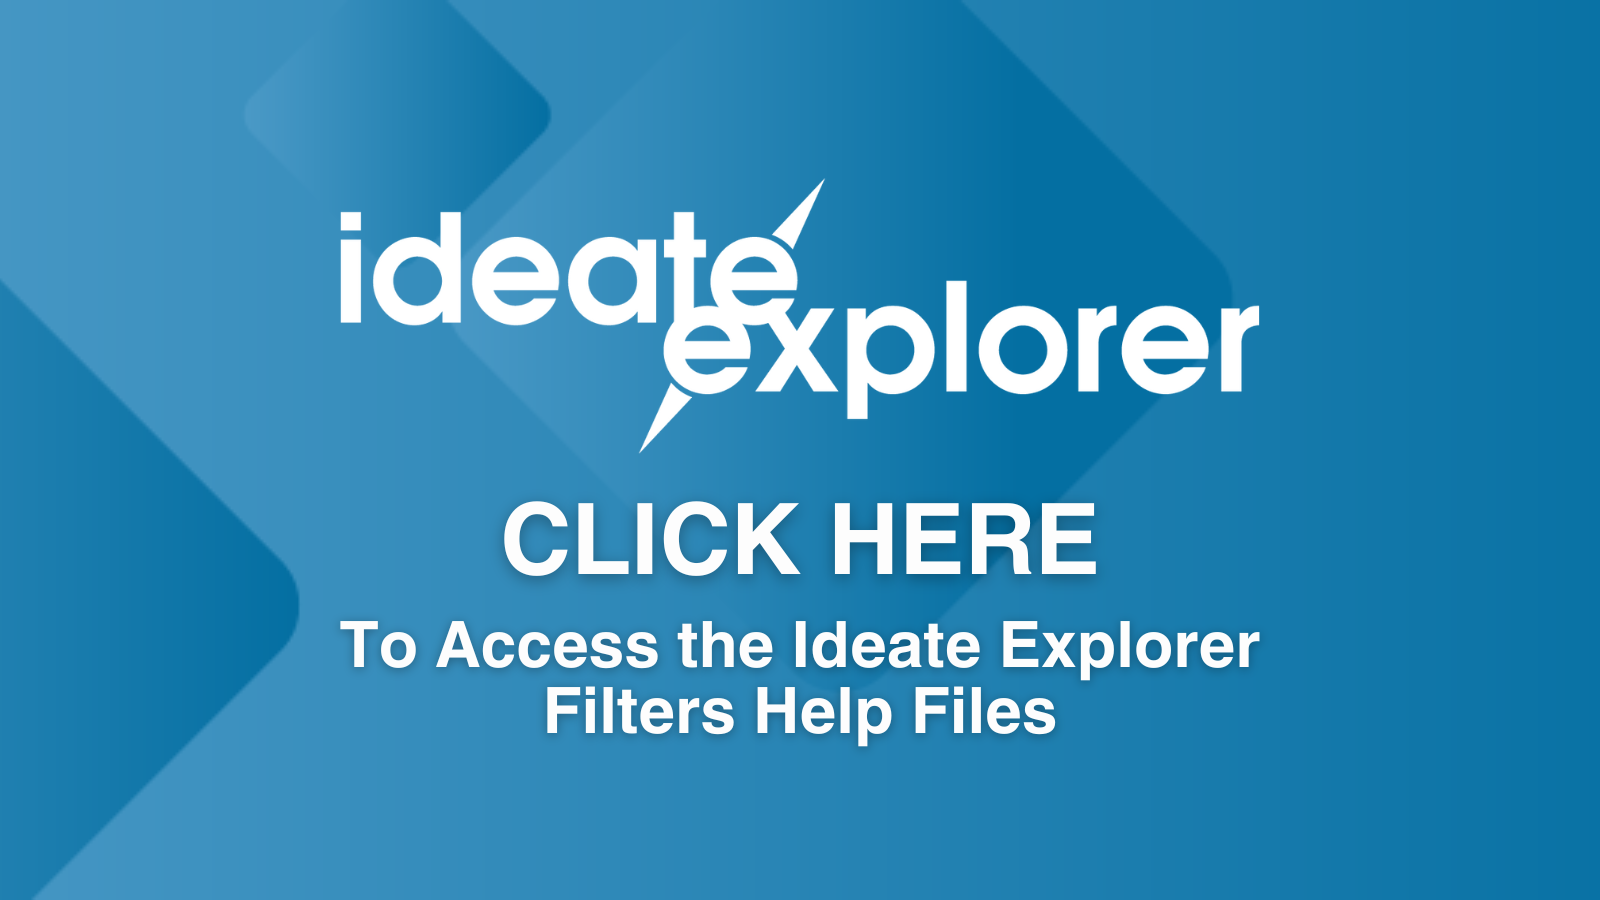 Introduction to Ideate Explorer Filters